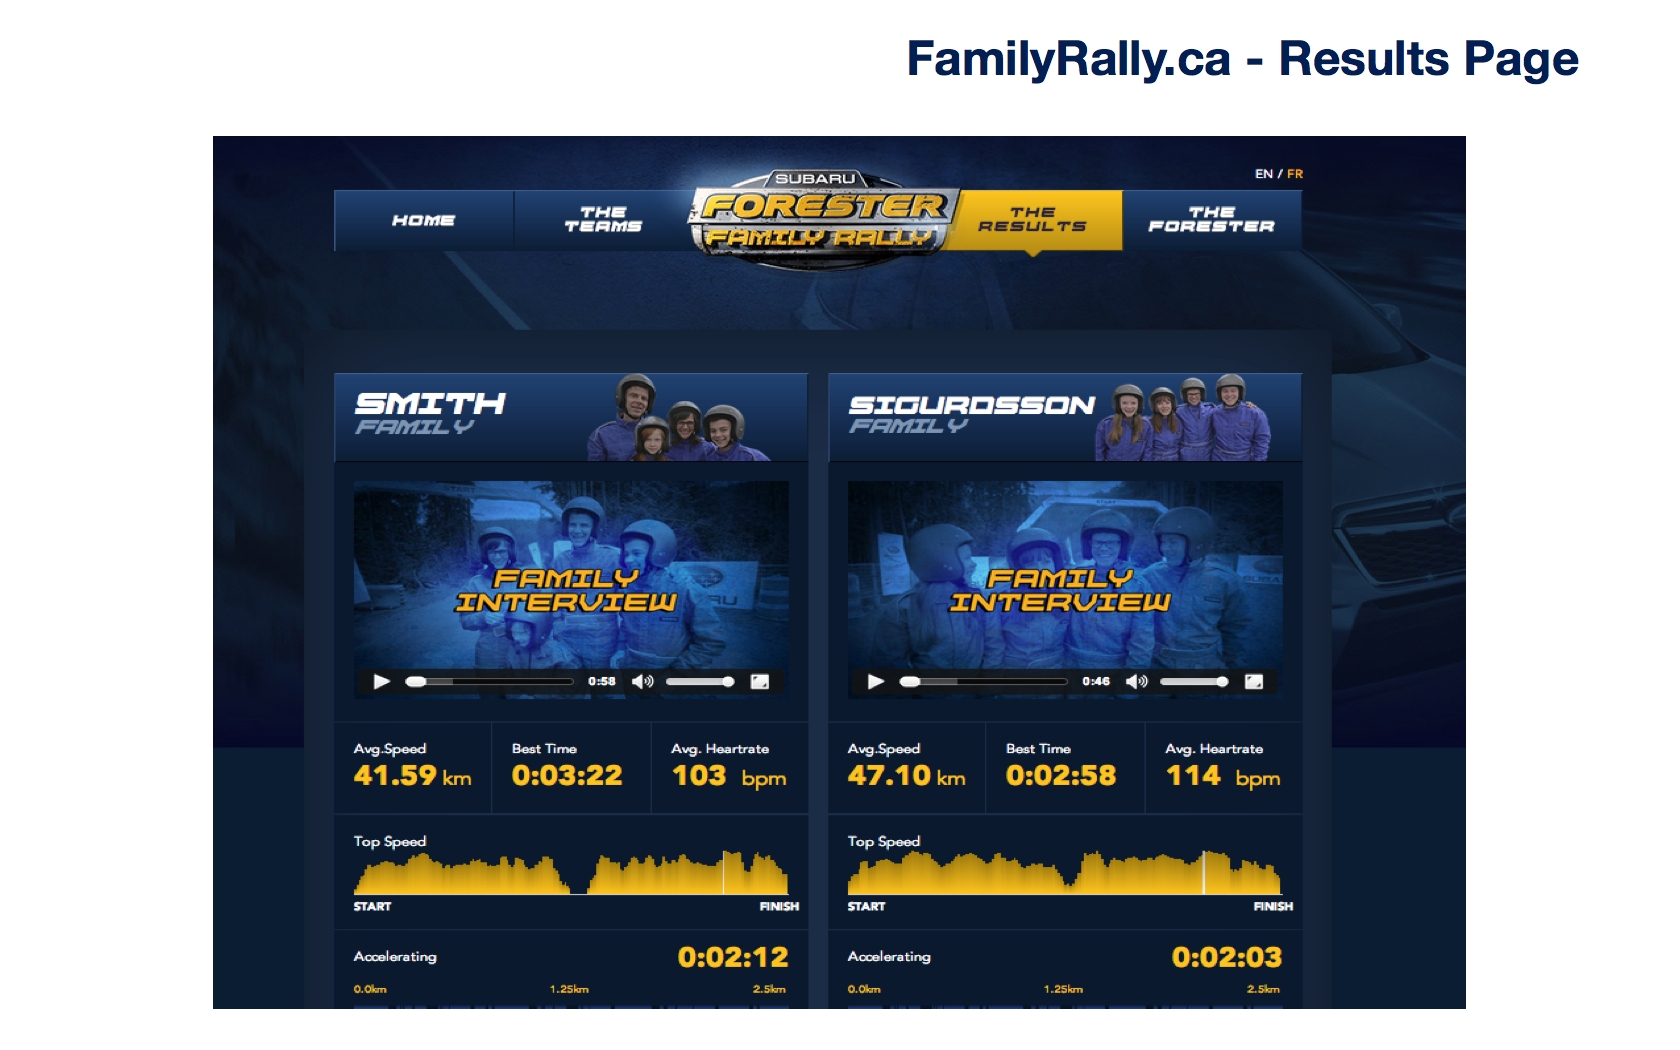 12325_Cassies_-_Subaru_Forester_Family_Rally_Creative_Elements.008